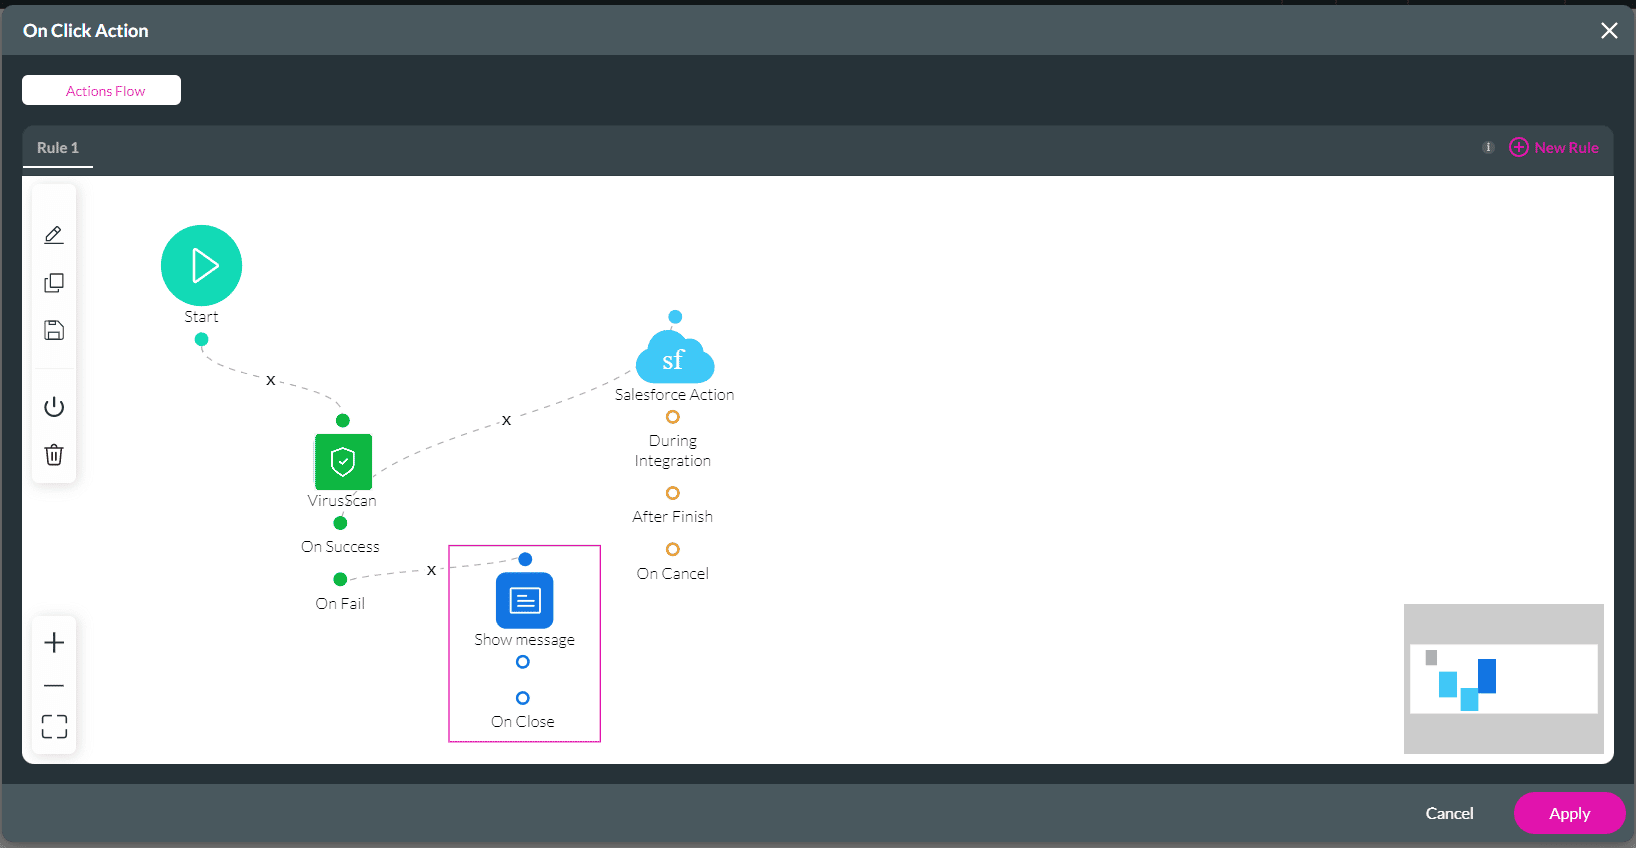 Node added to On Click Action screen - example